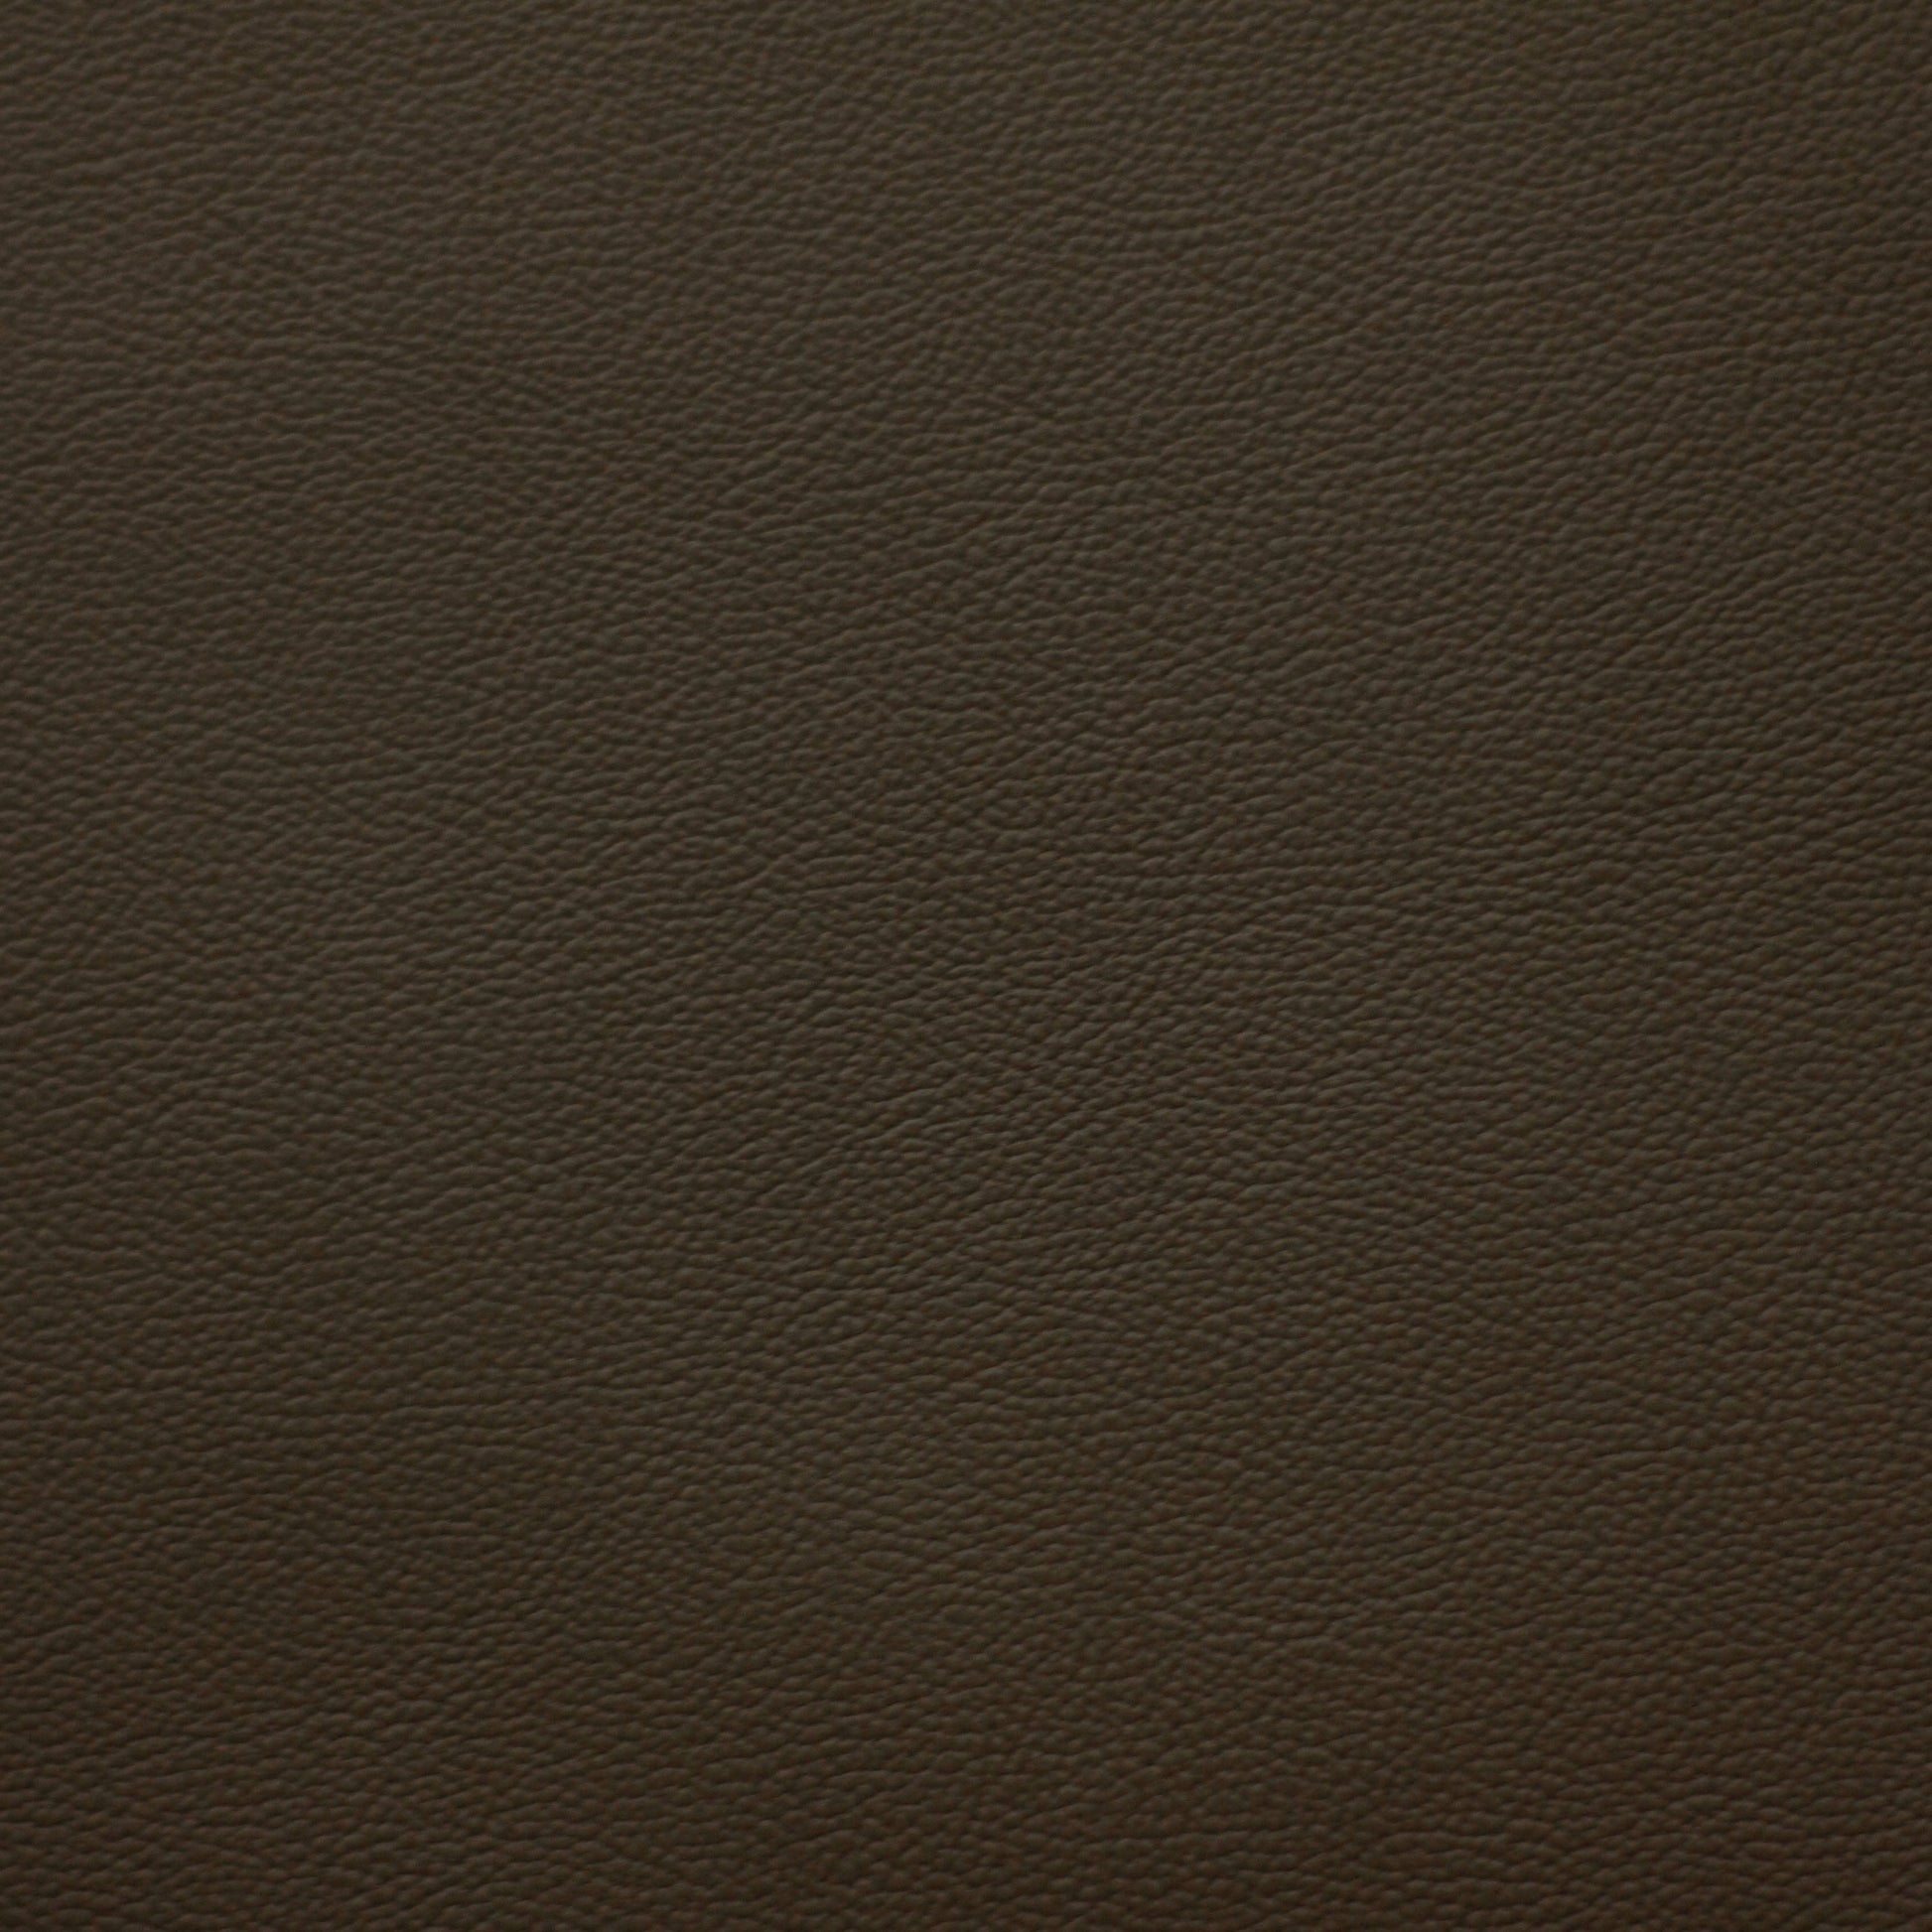 Empire, Semisweet, Iconic® Antimicrobial & Cleanable, Hospitality Leather Hide